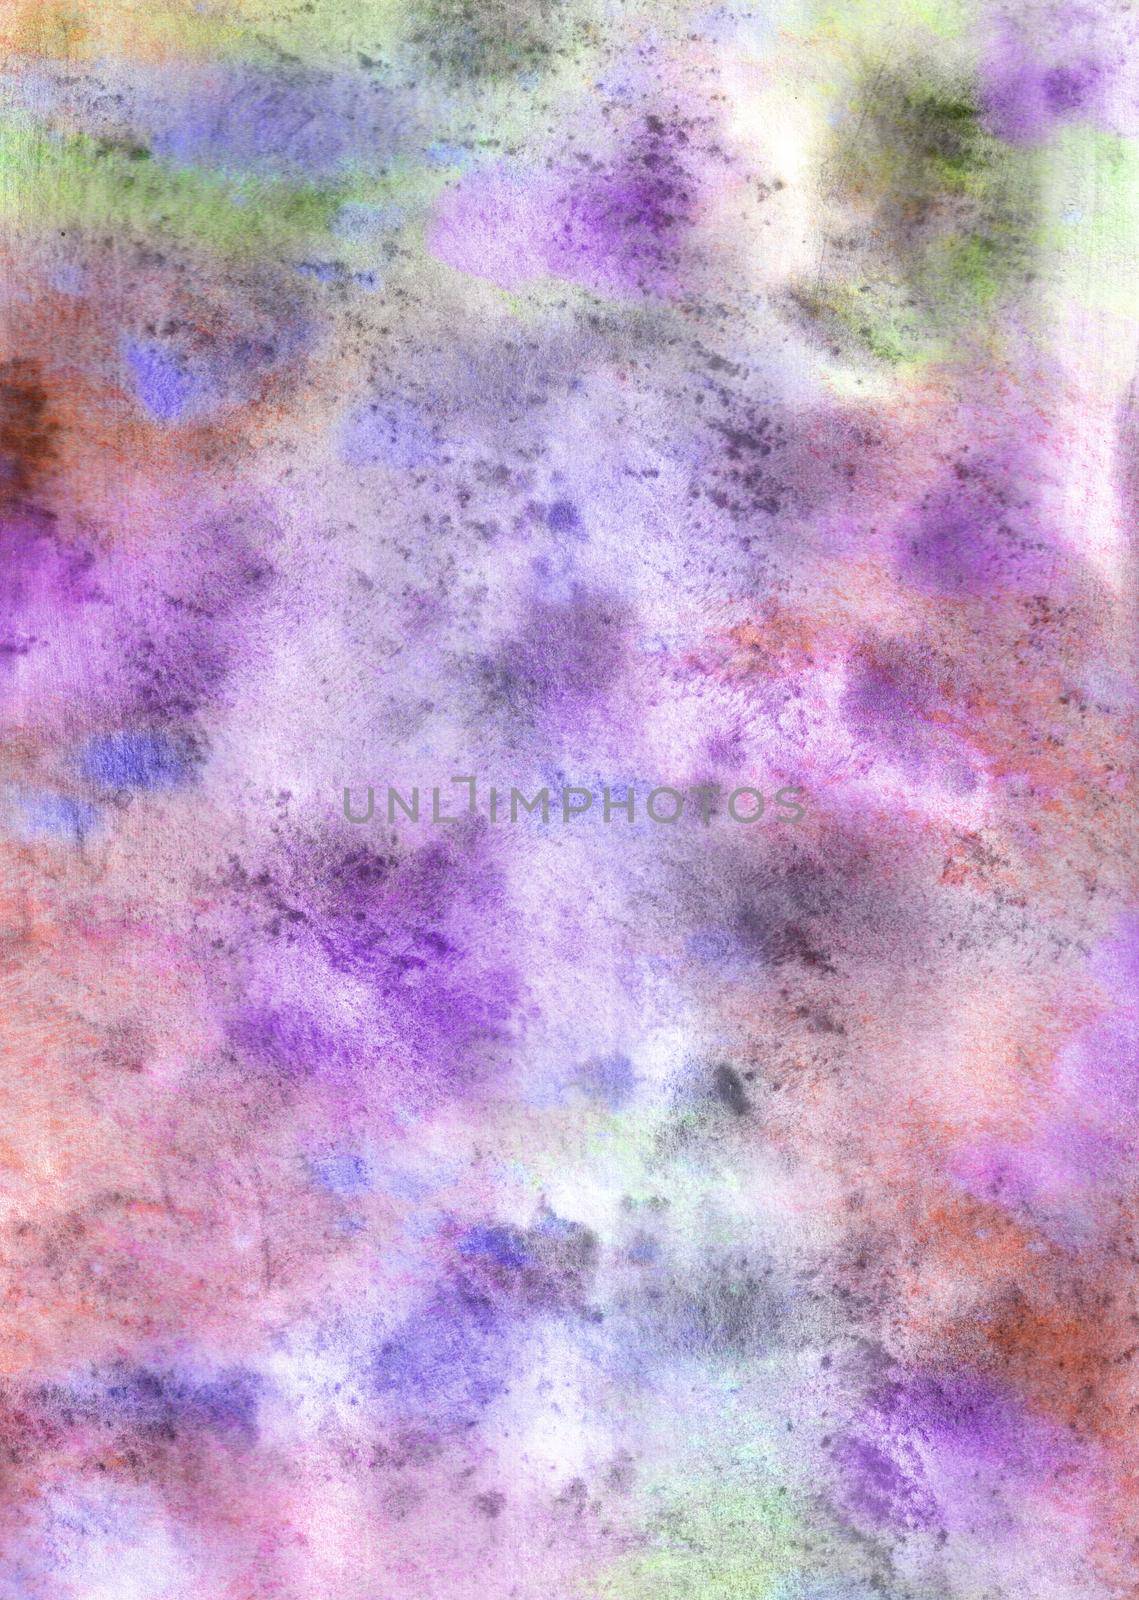 Color abstract watercolor background with texture effect and smooth transitions in different colors. Stock illustration for posters, postcards, banners and creative design.
